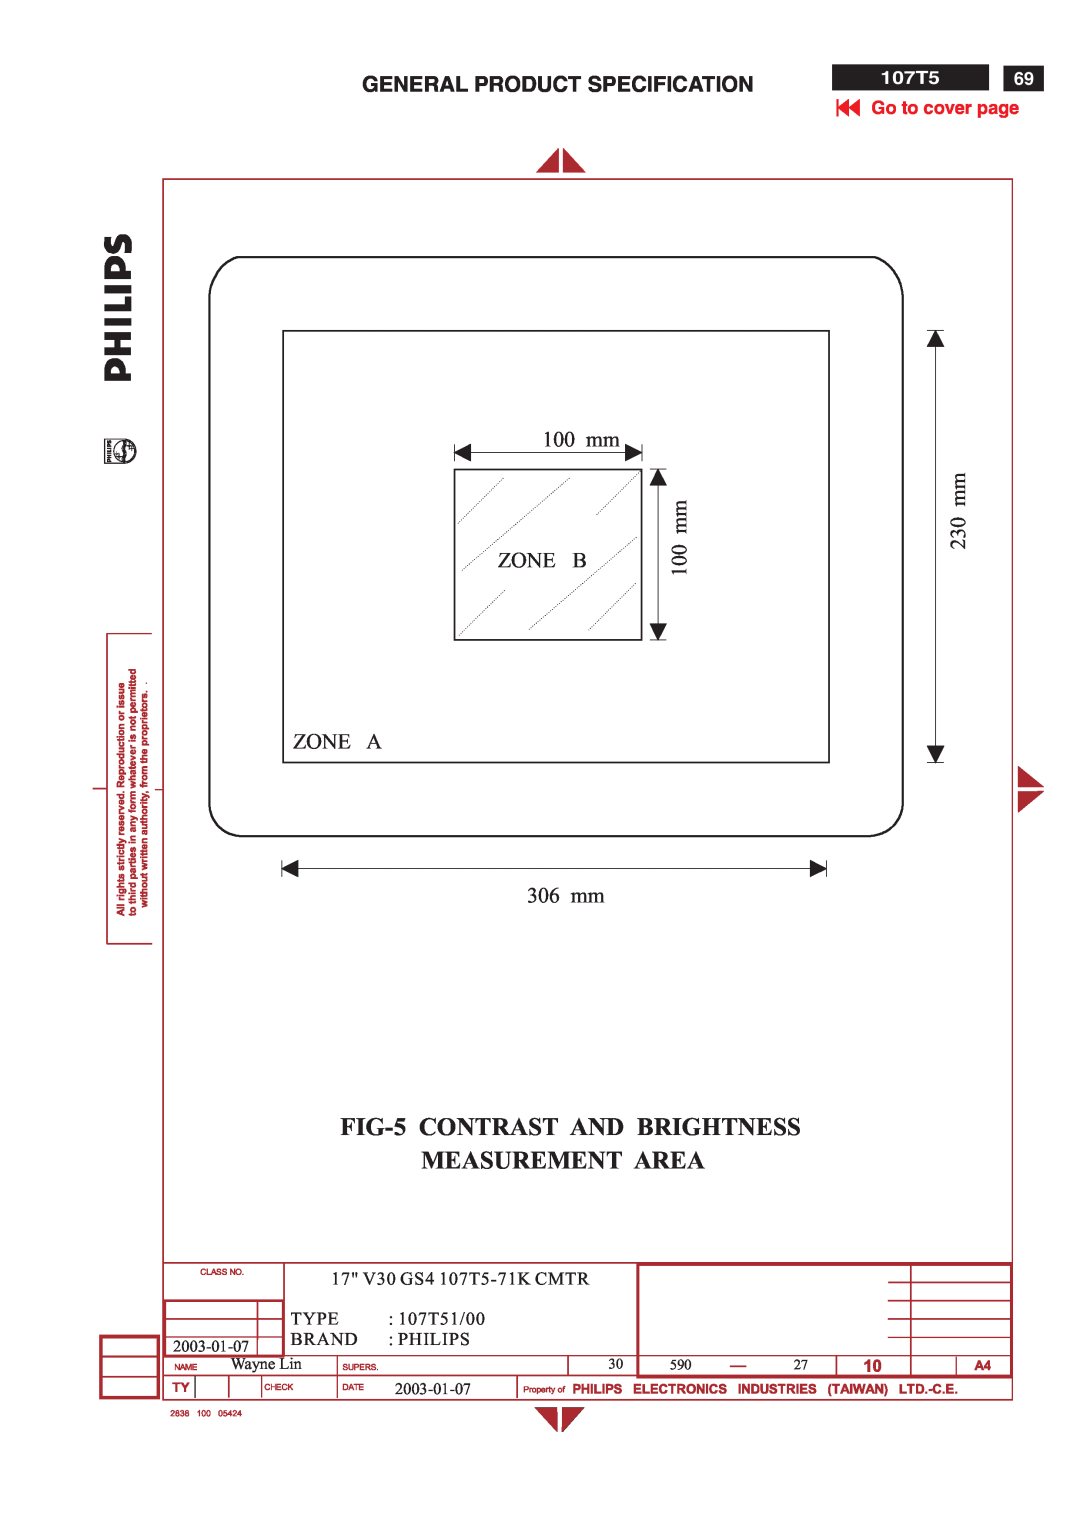 Philips V30 FIG-5 CONTRAST AND BRIGHTNESS MEASUREMENT AREA, General Product Specification, 100 mm, Zone B, ZONE A 306 mm 